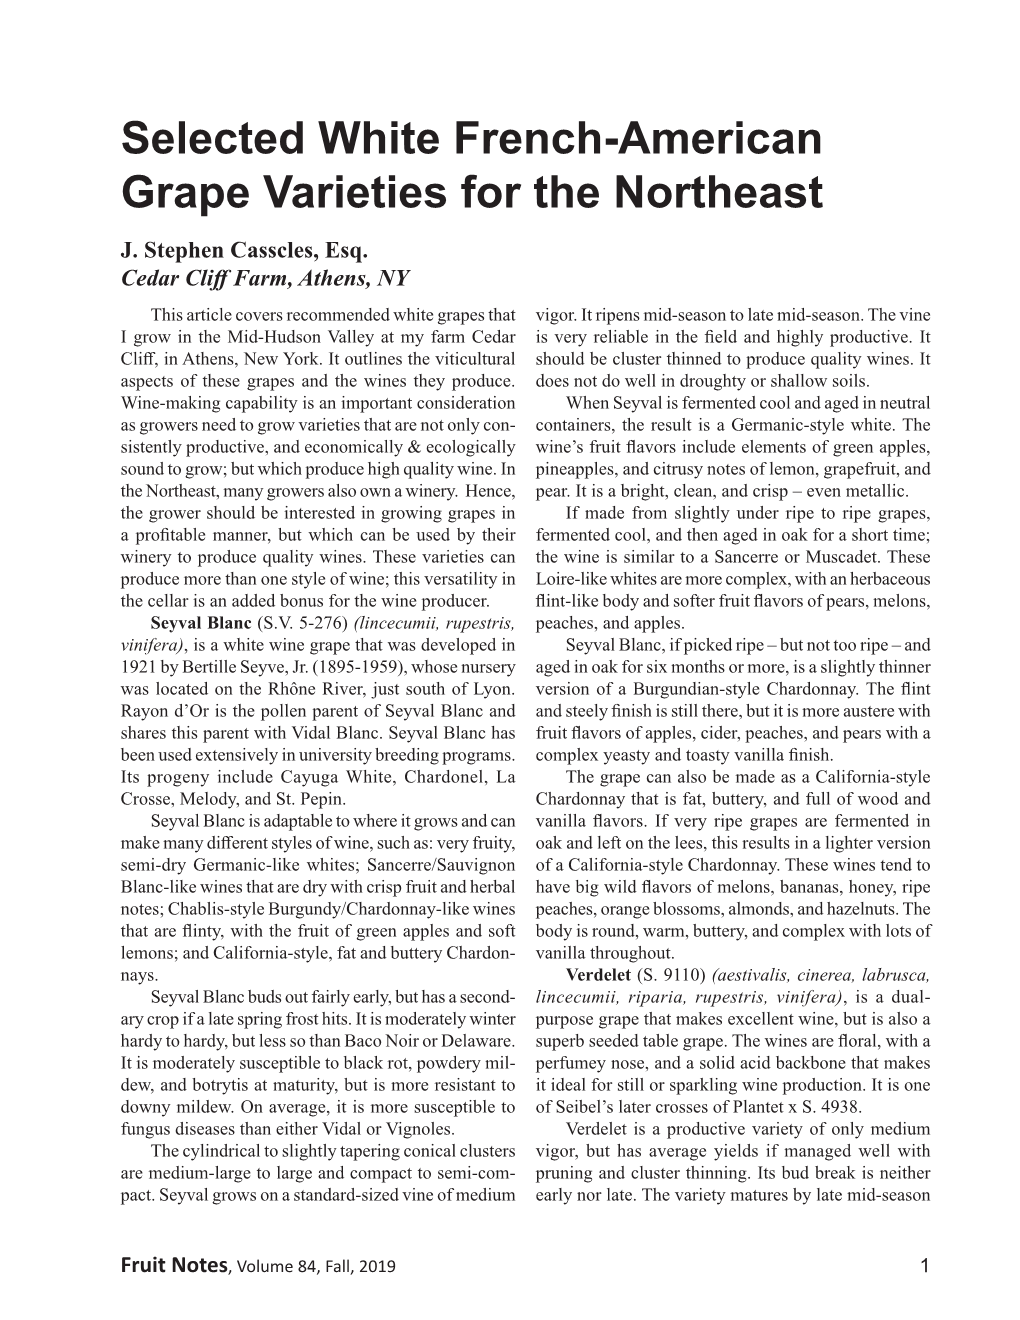 Selected White French-American Grape Varieties for the Northeast